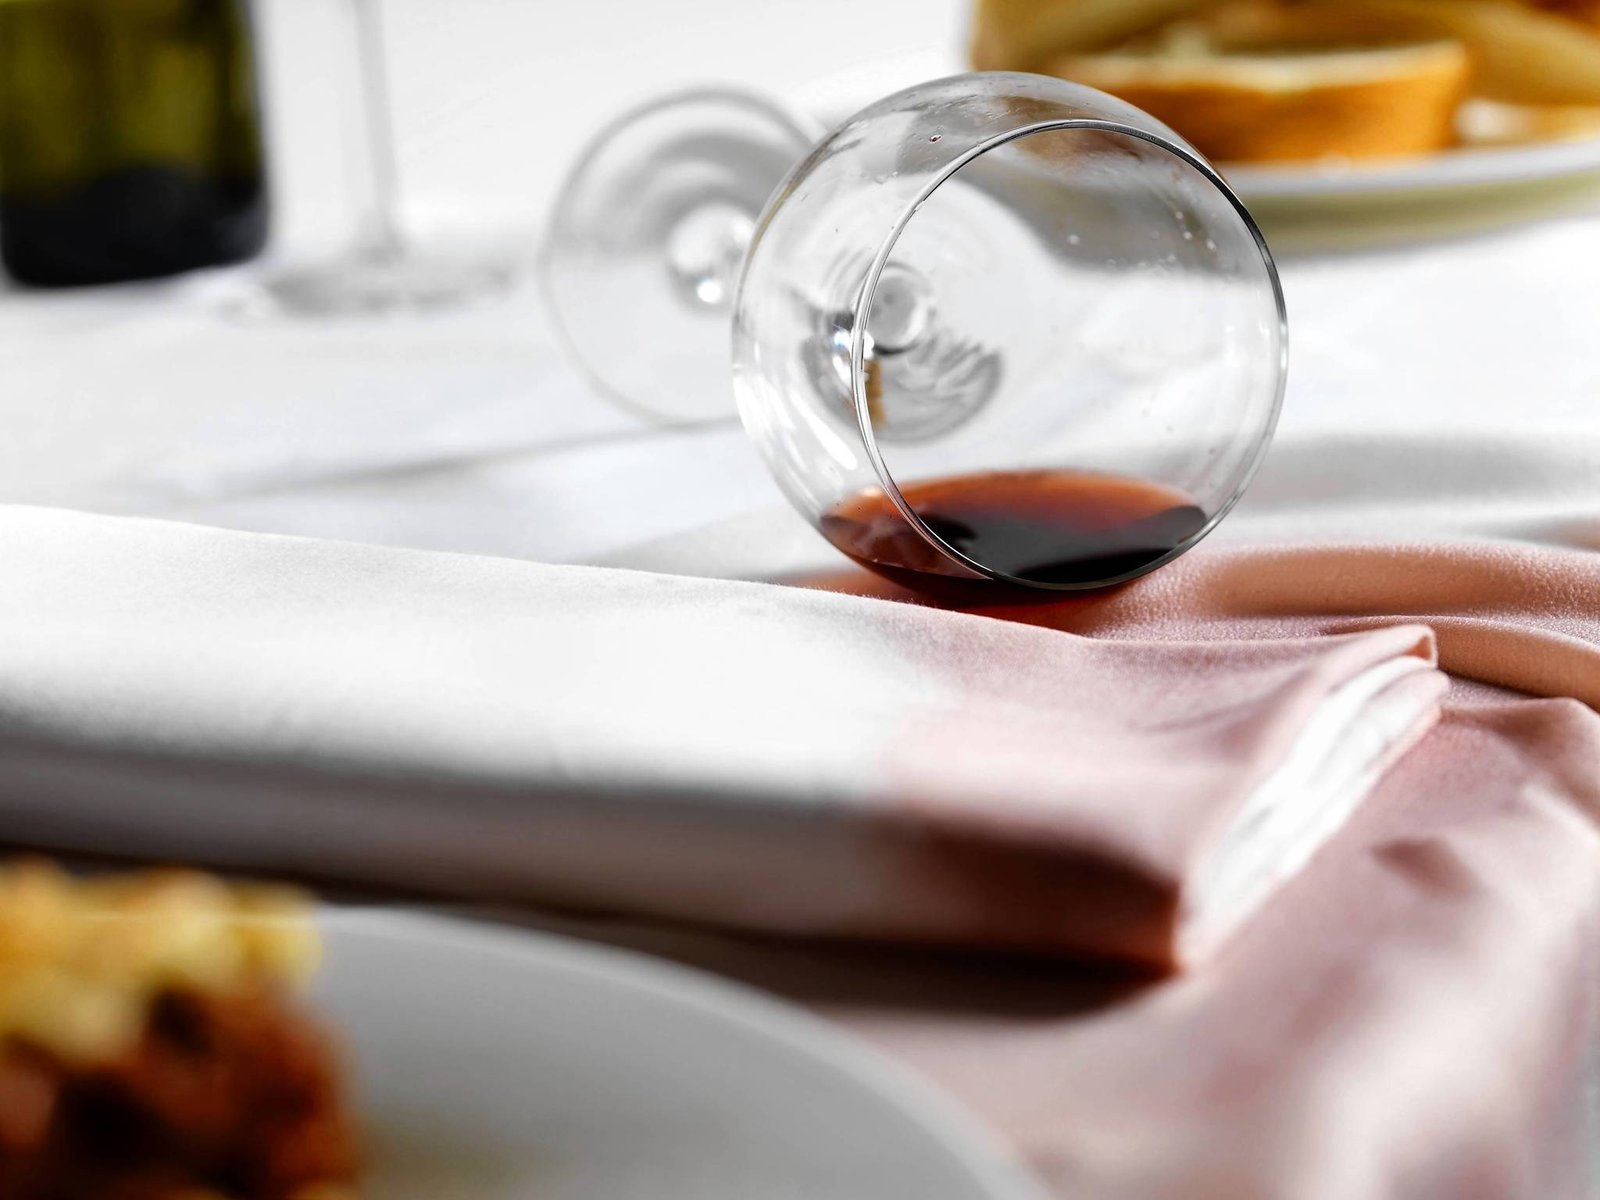 The fight against the red wine stains is not difficult